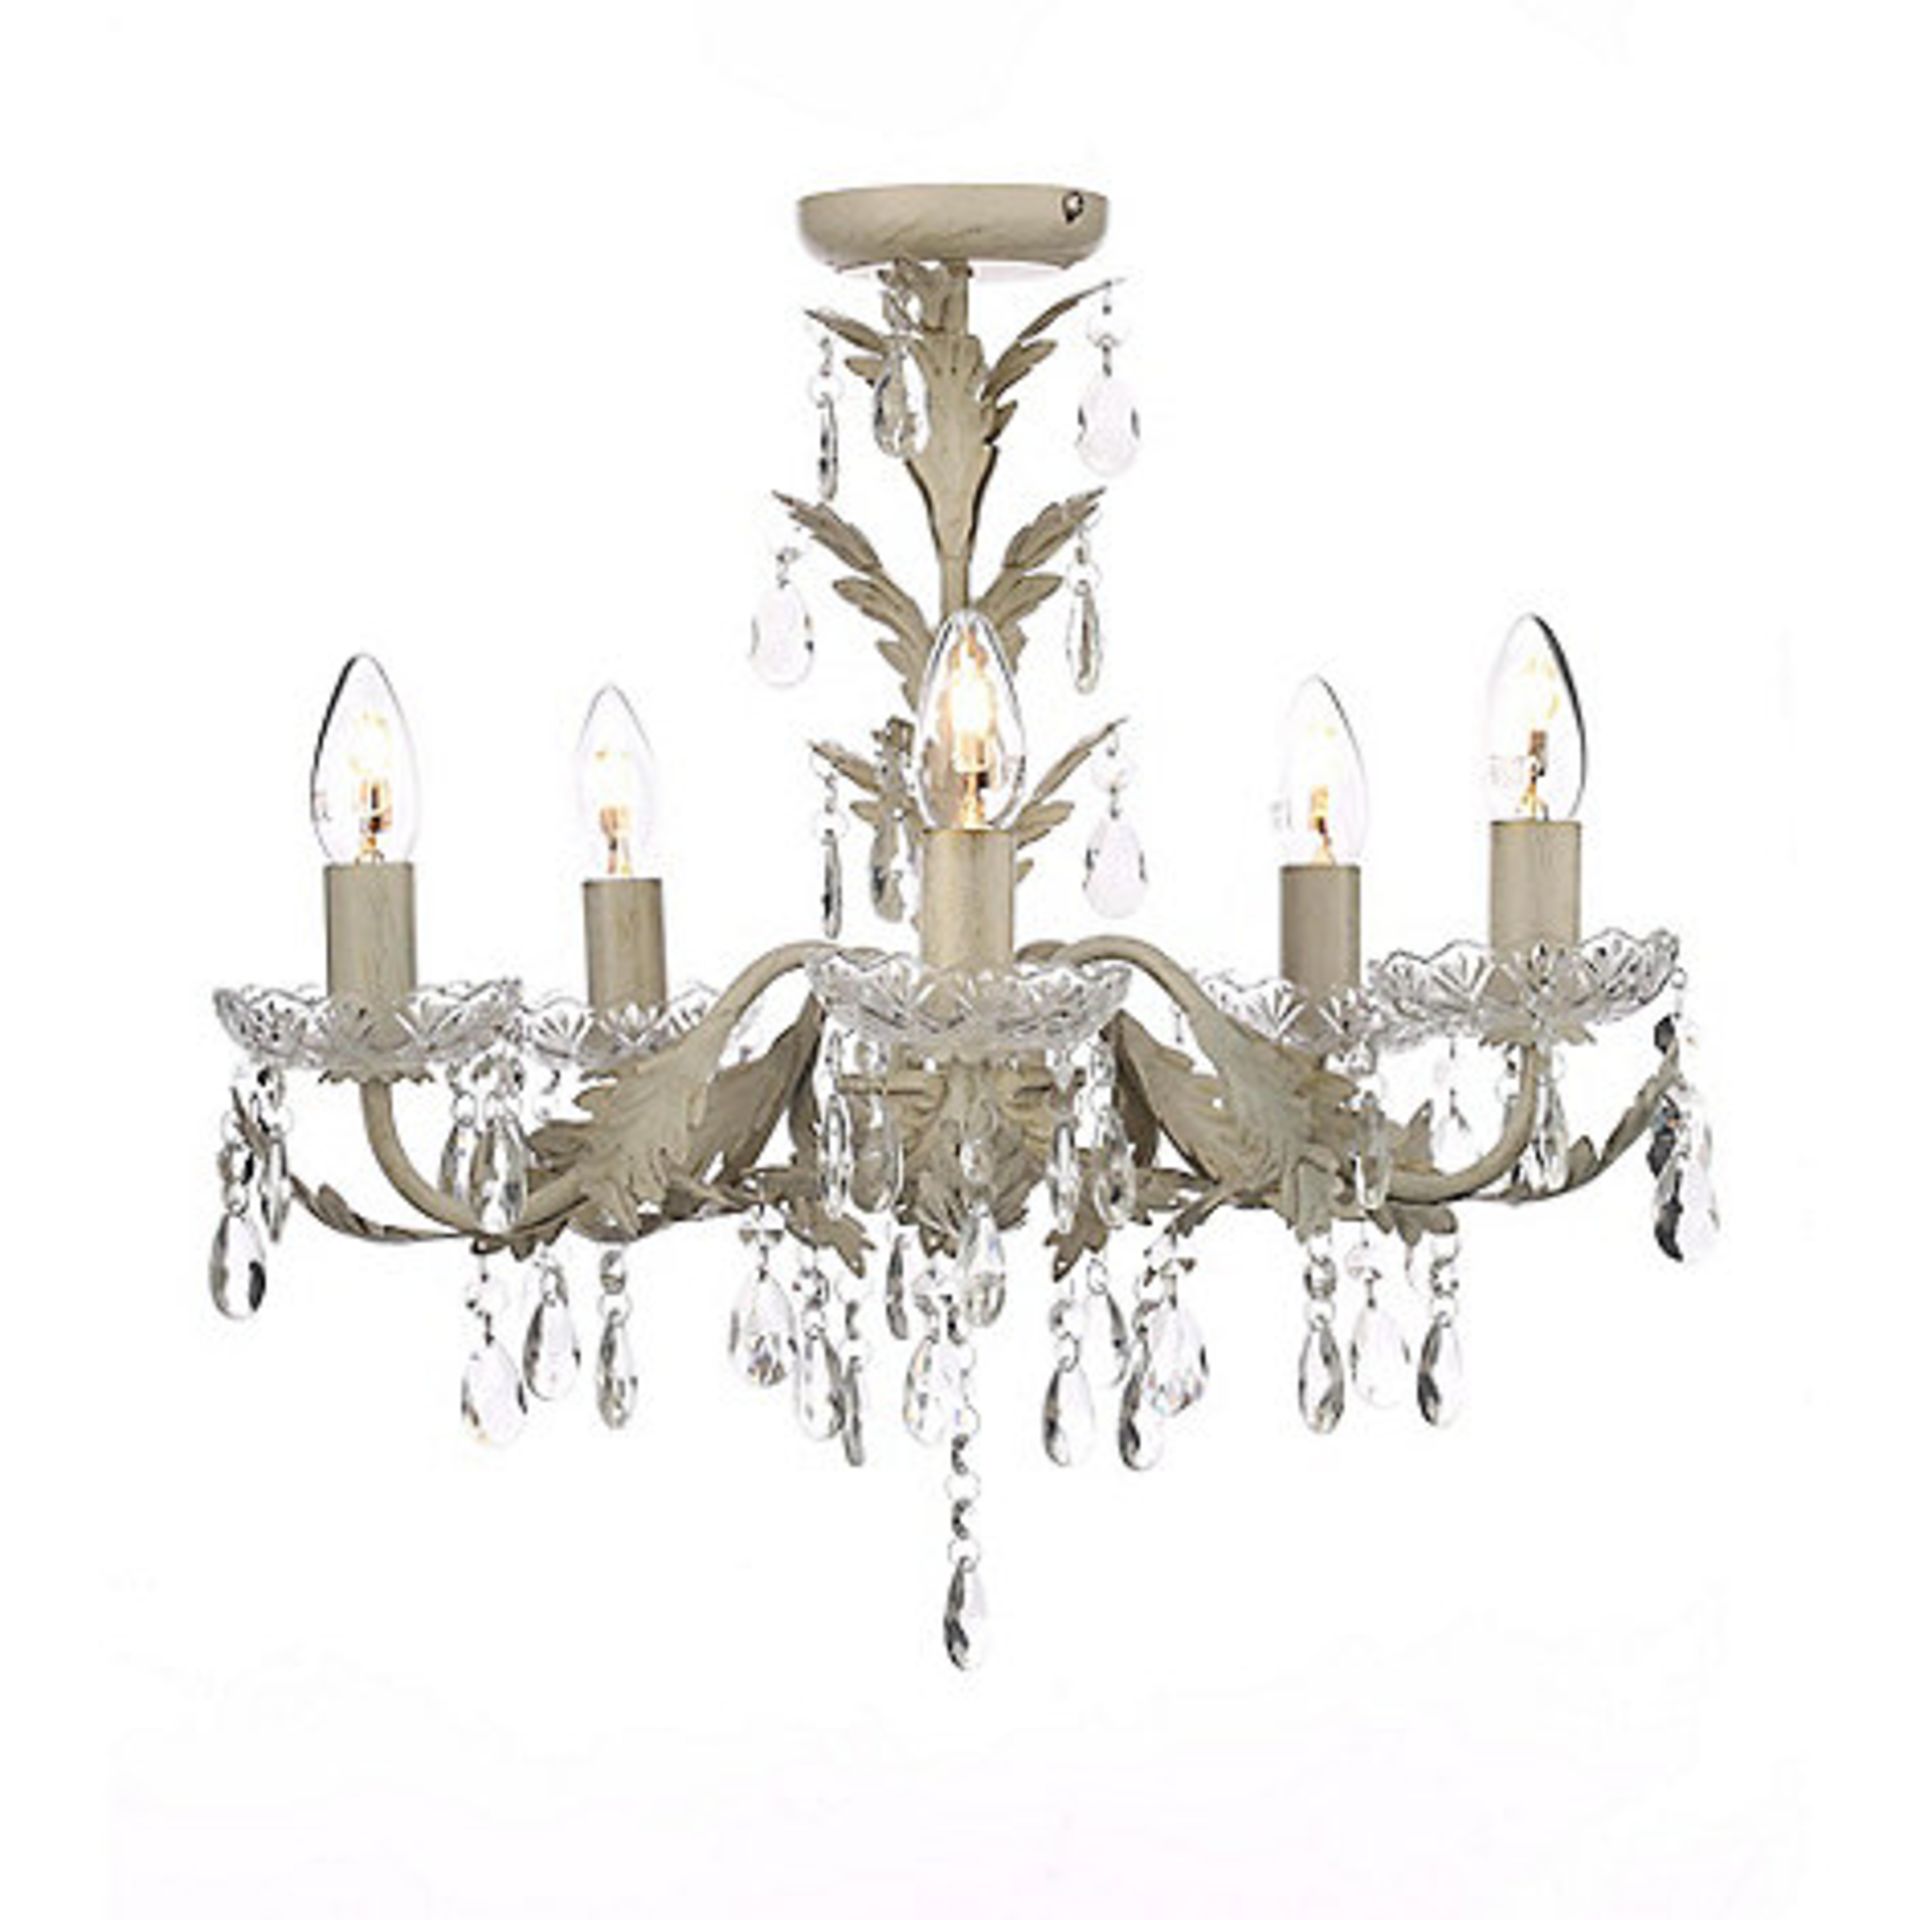 1 x BOXED PAISLEY FLUSH CHANDELIER LIGHT RRP £60 *PLEASE NOTE THAT THE BID PRICE IS MULTIPLIED BY